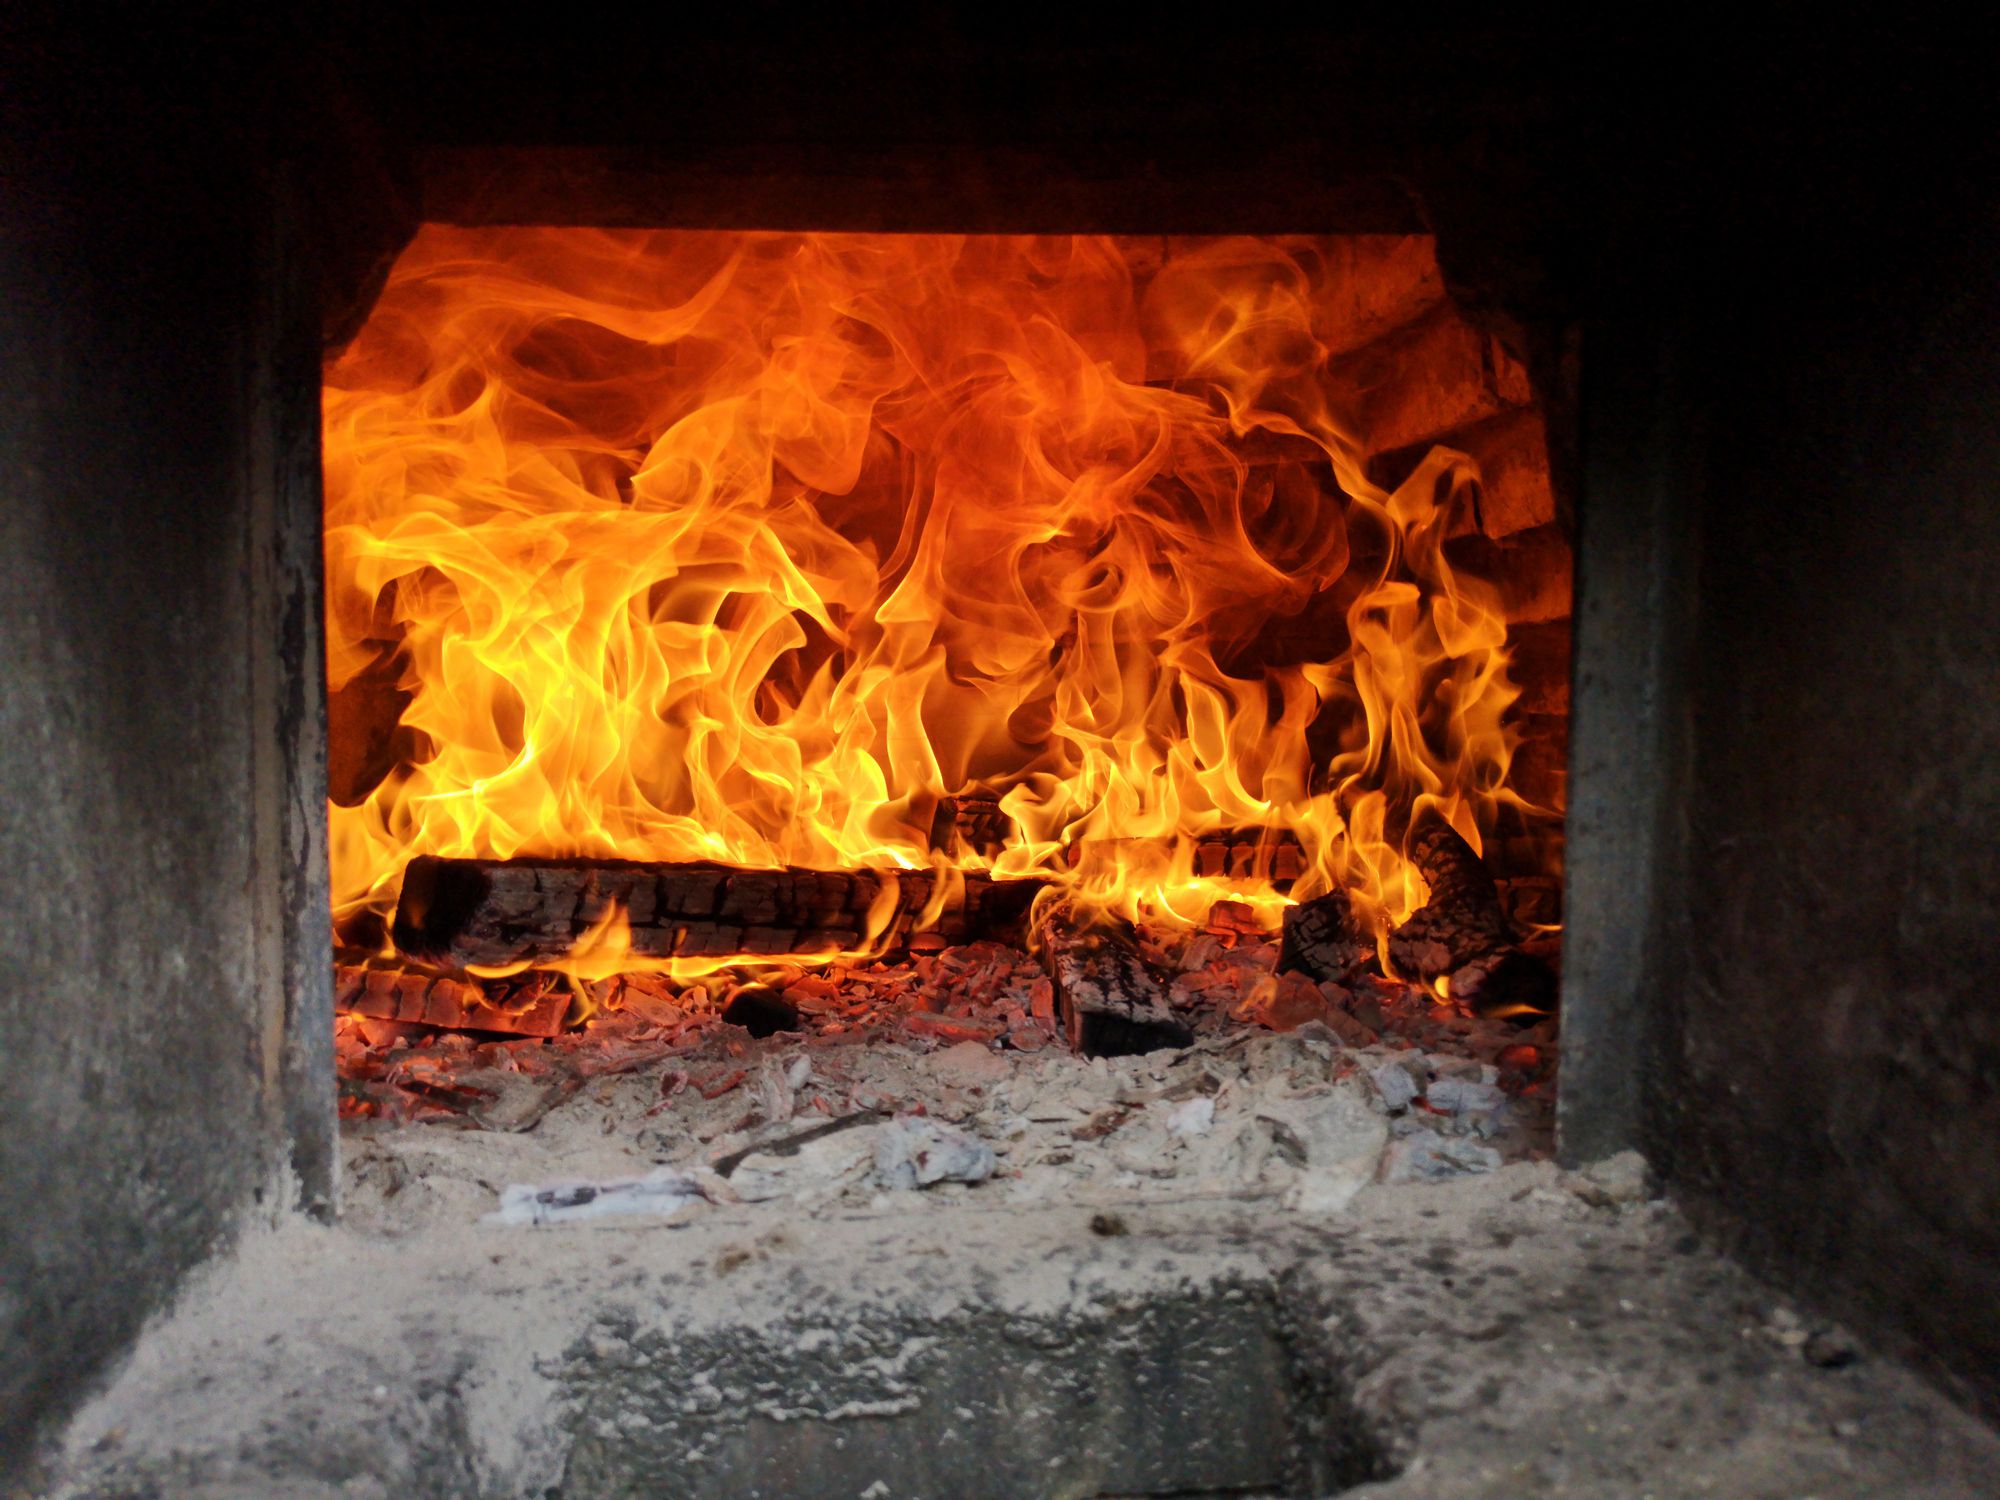 House Smells Like Smoke From Fireplace Luxury are Wood Burning Stoves Safe for Your Health